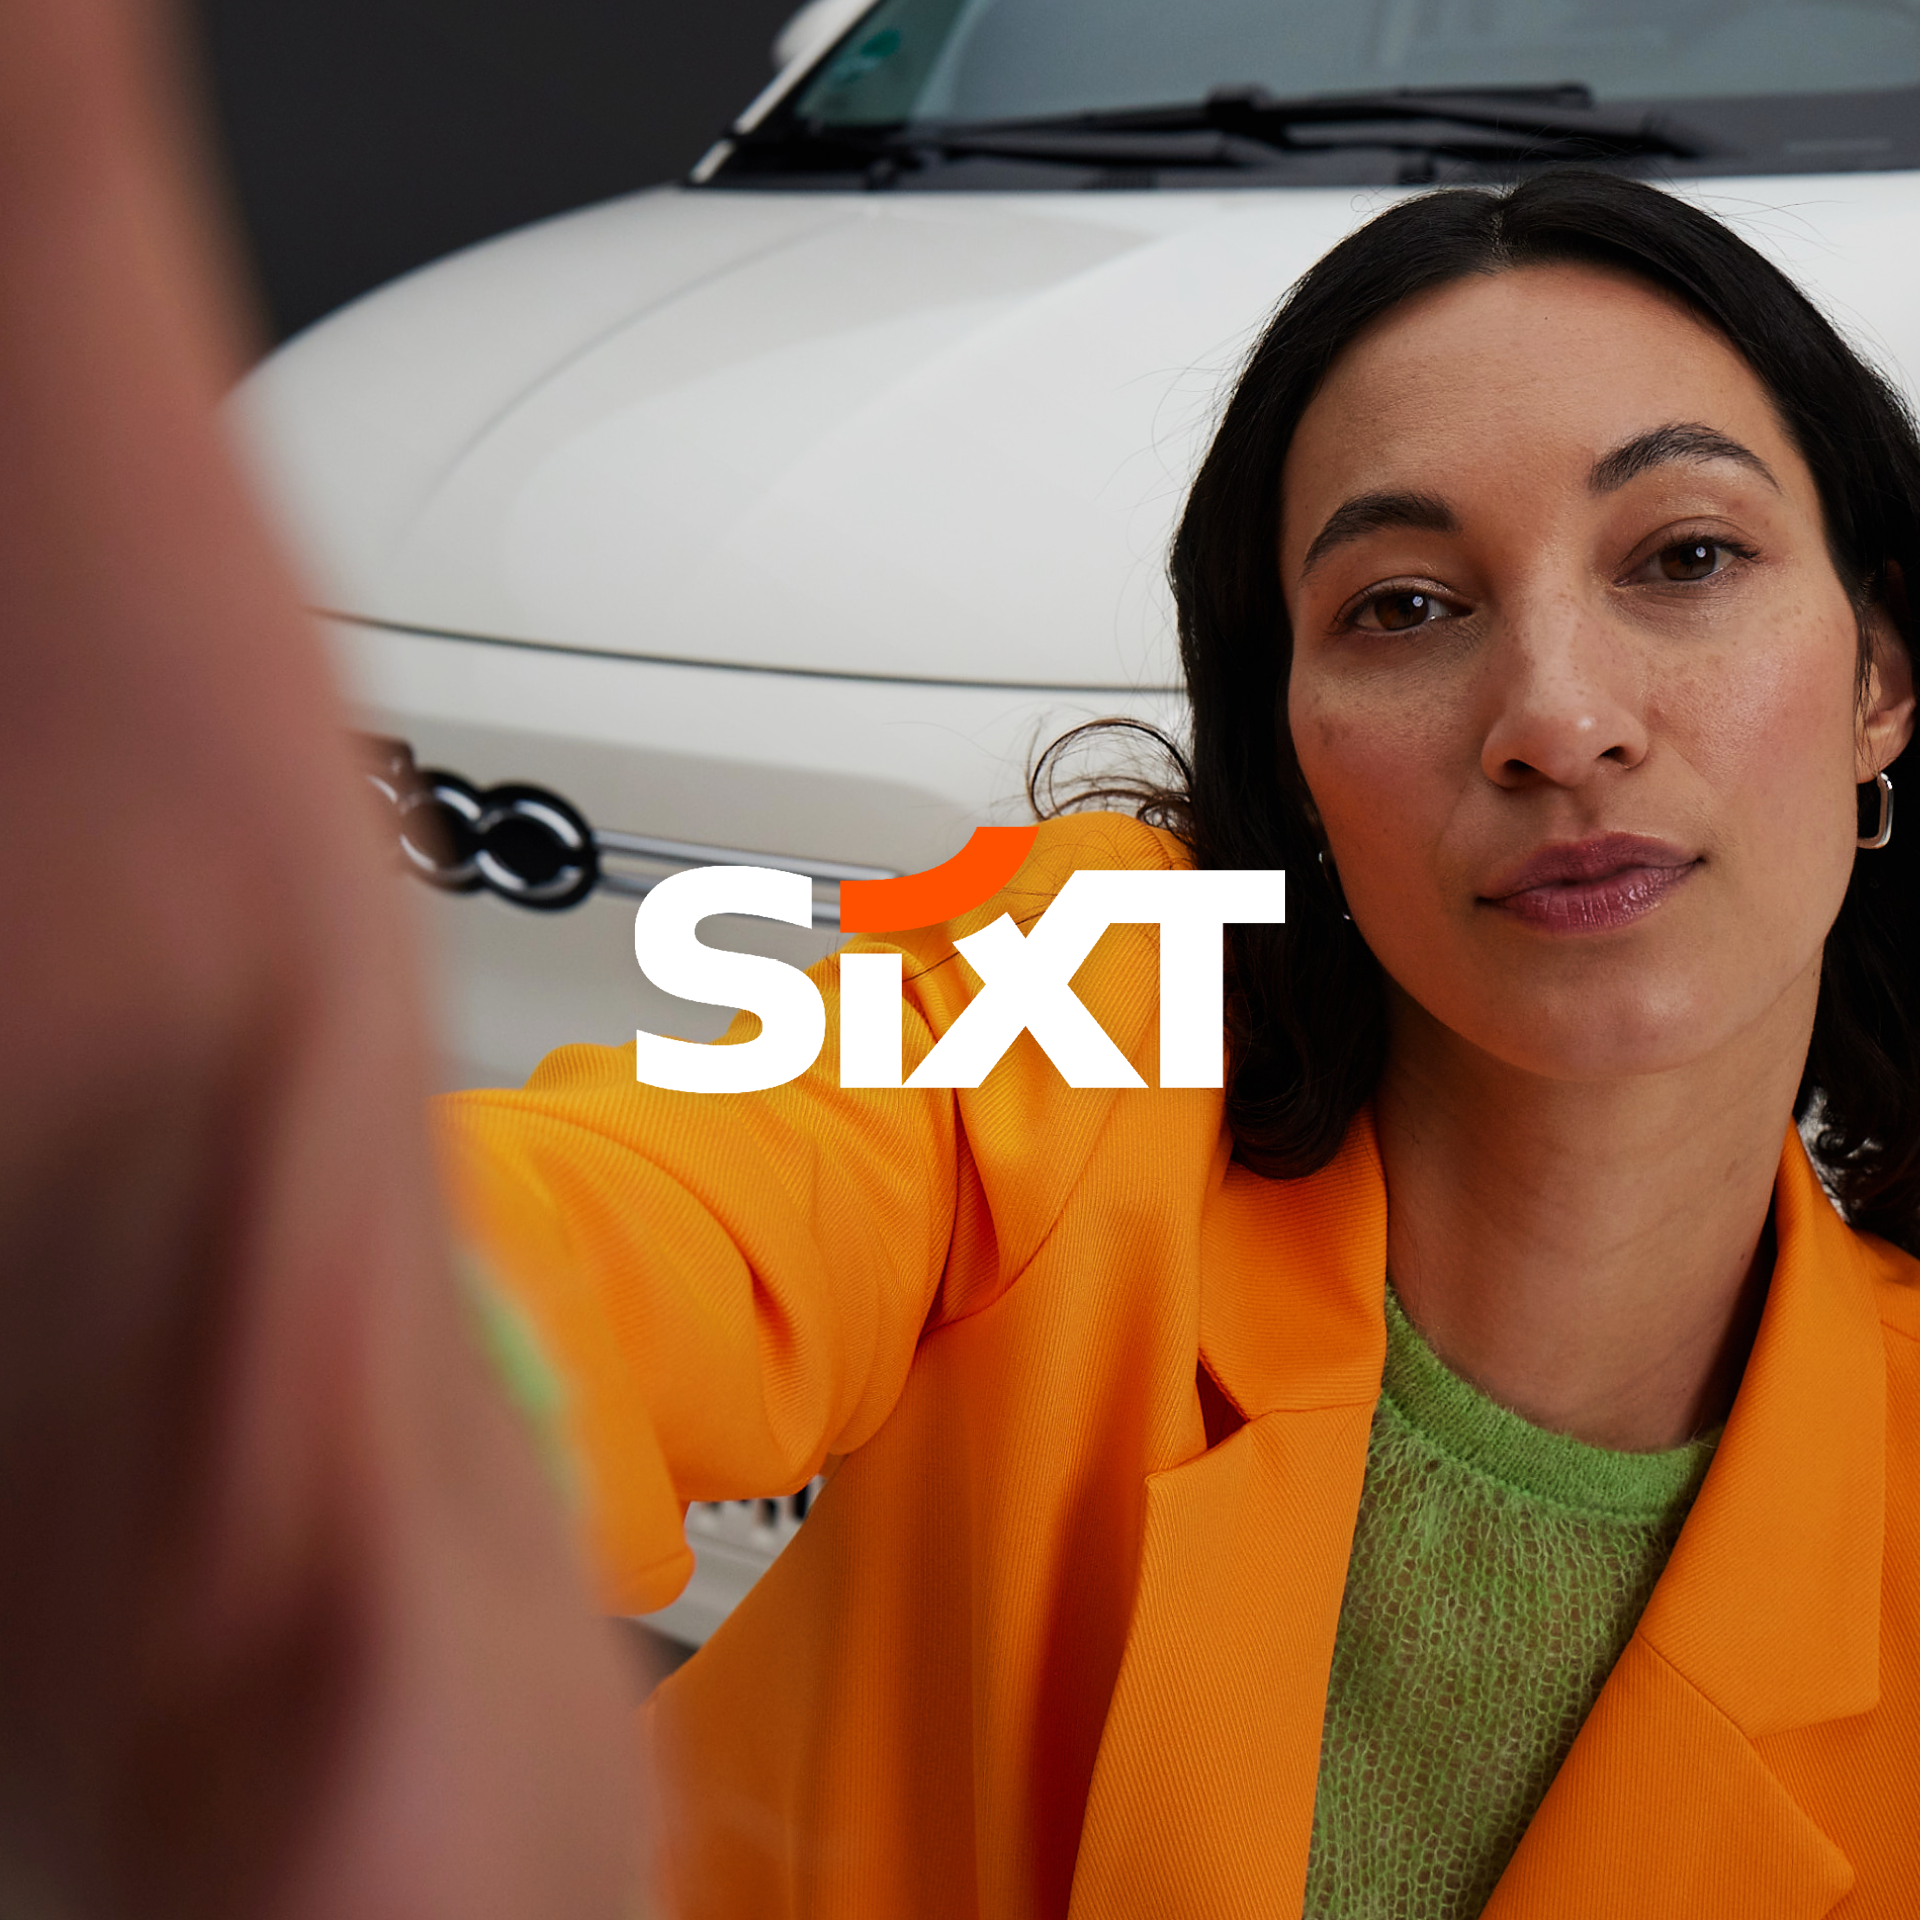 SIXT ad in new brand design by Jung von Matt BRAND IDENTITY: a young women with a blazer jacket in SIXT Orange standing in front of a white FIAT 500 making a selfie with her smartphone, the hand a bit in front of the camera